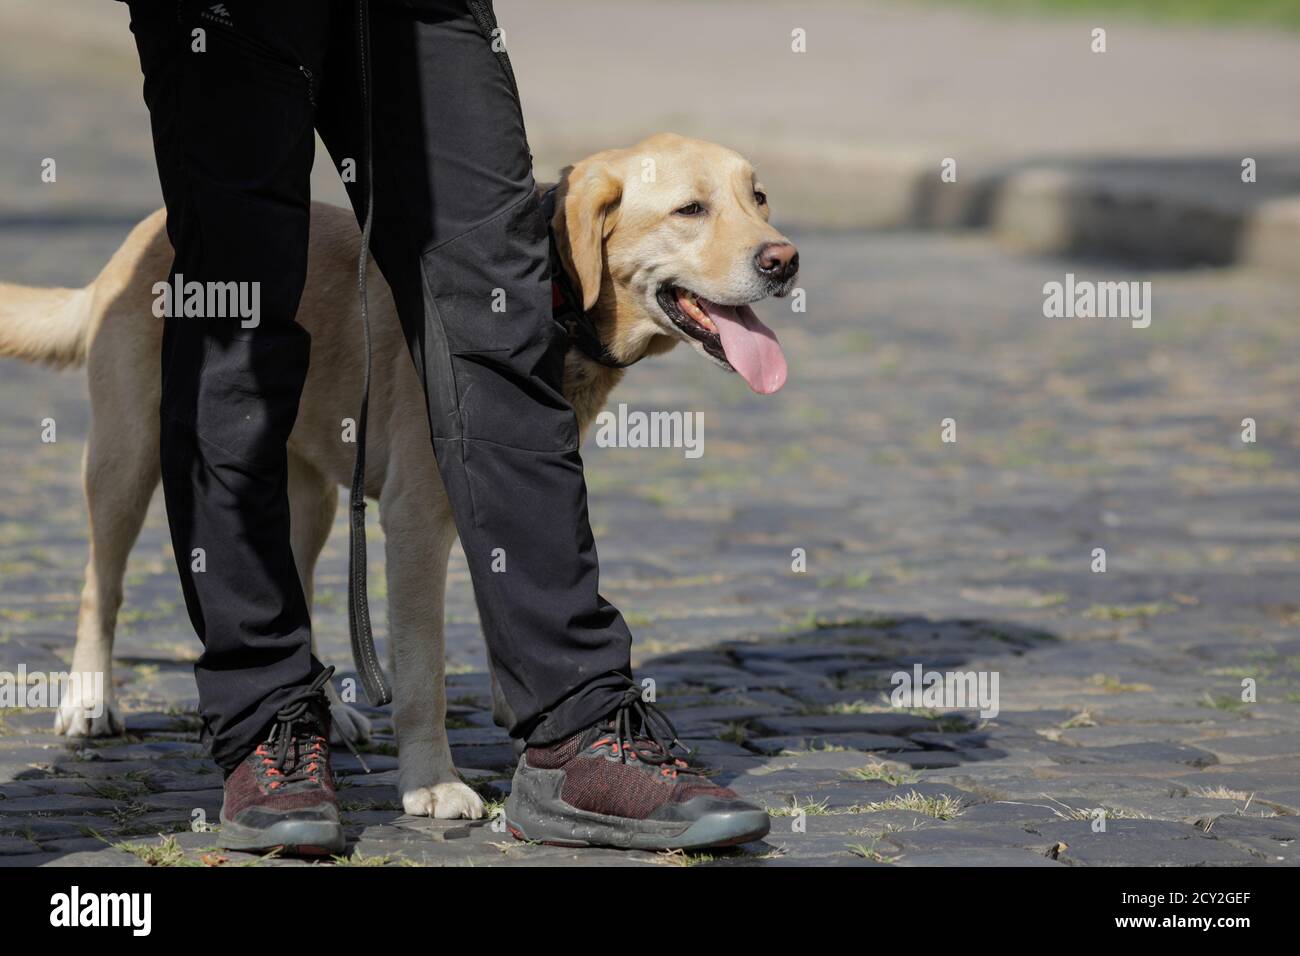 Bucharest, Romania - September 14, 2020: Search and rescue dog with his owner. Stock Photo